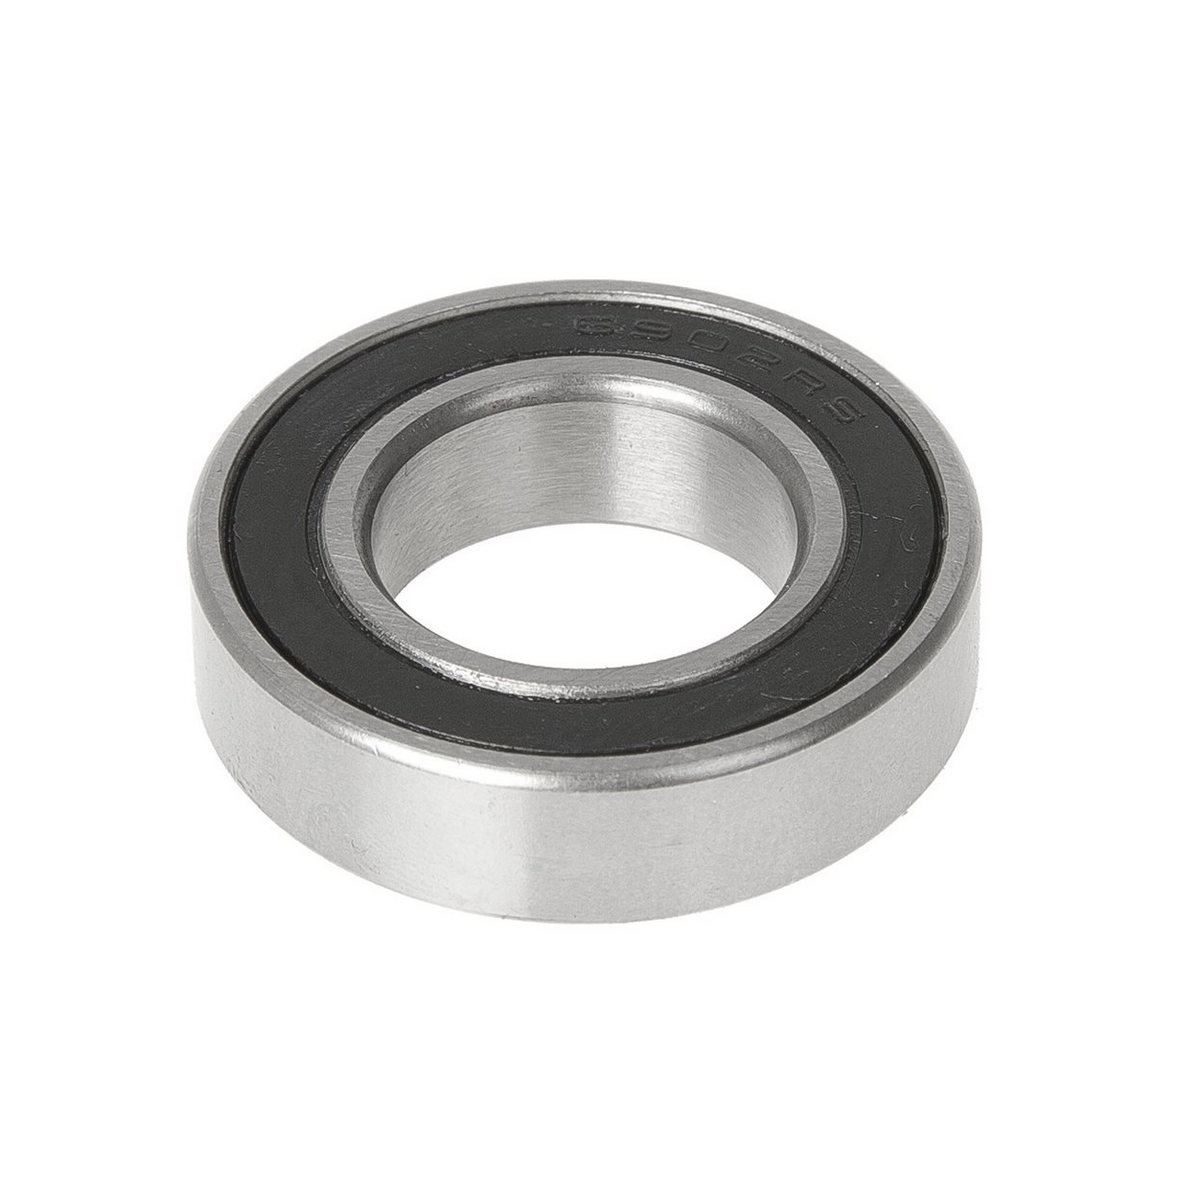 Sealed Bearing 15x26x7 For D412 And Fs62 Hubs